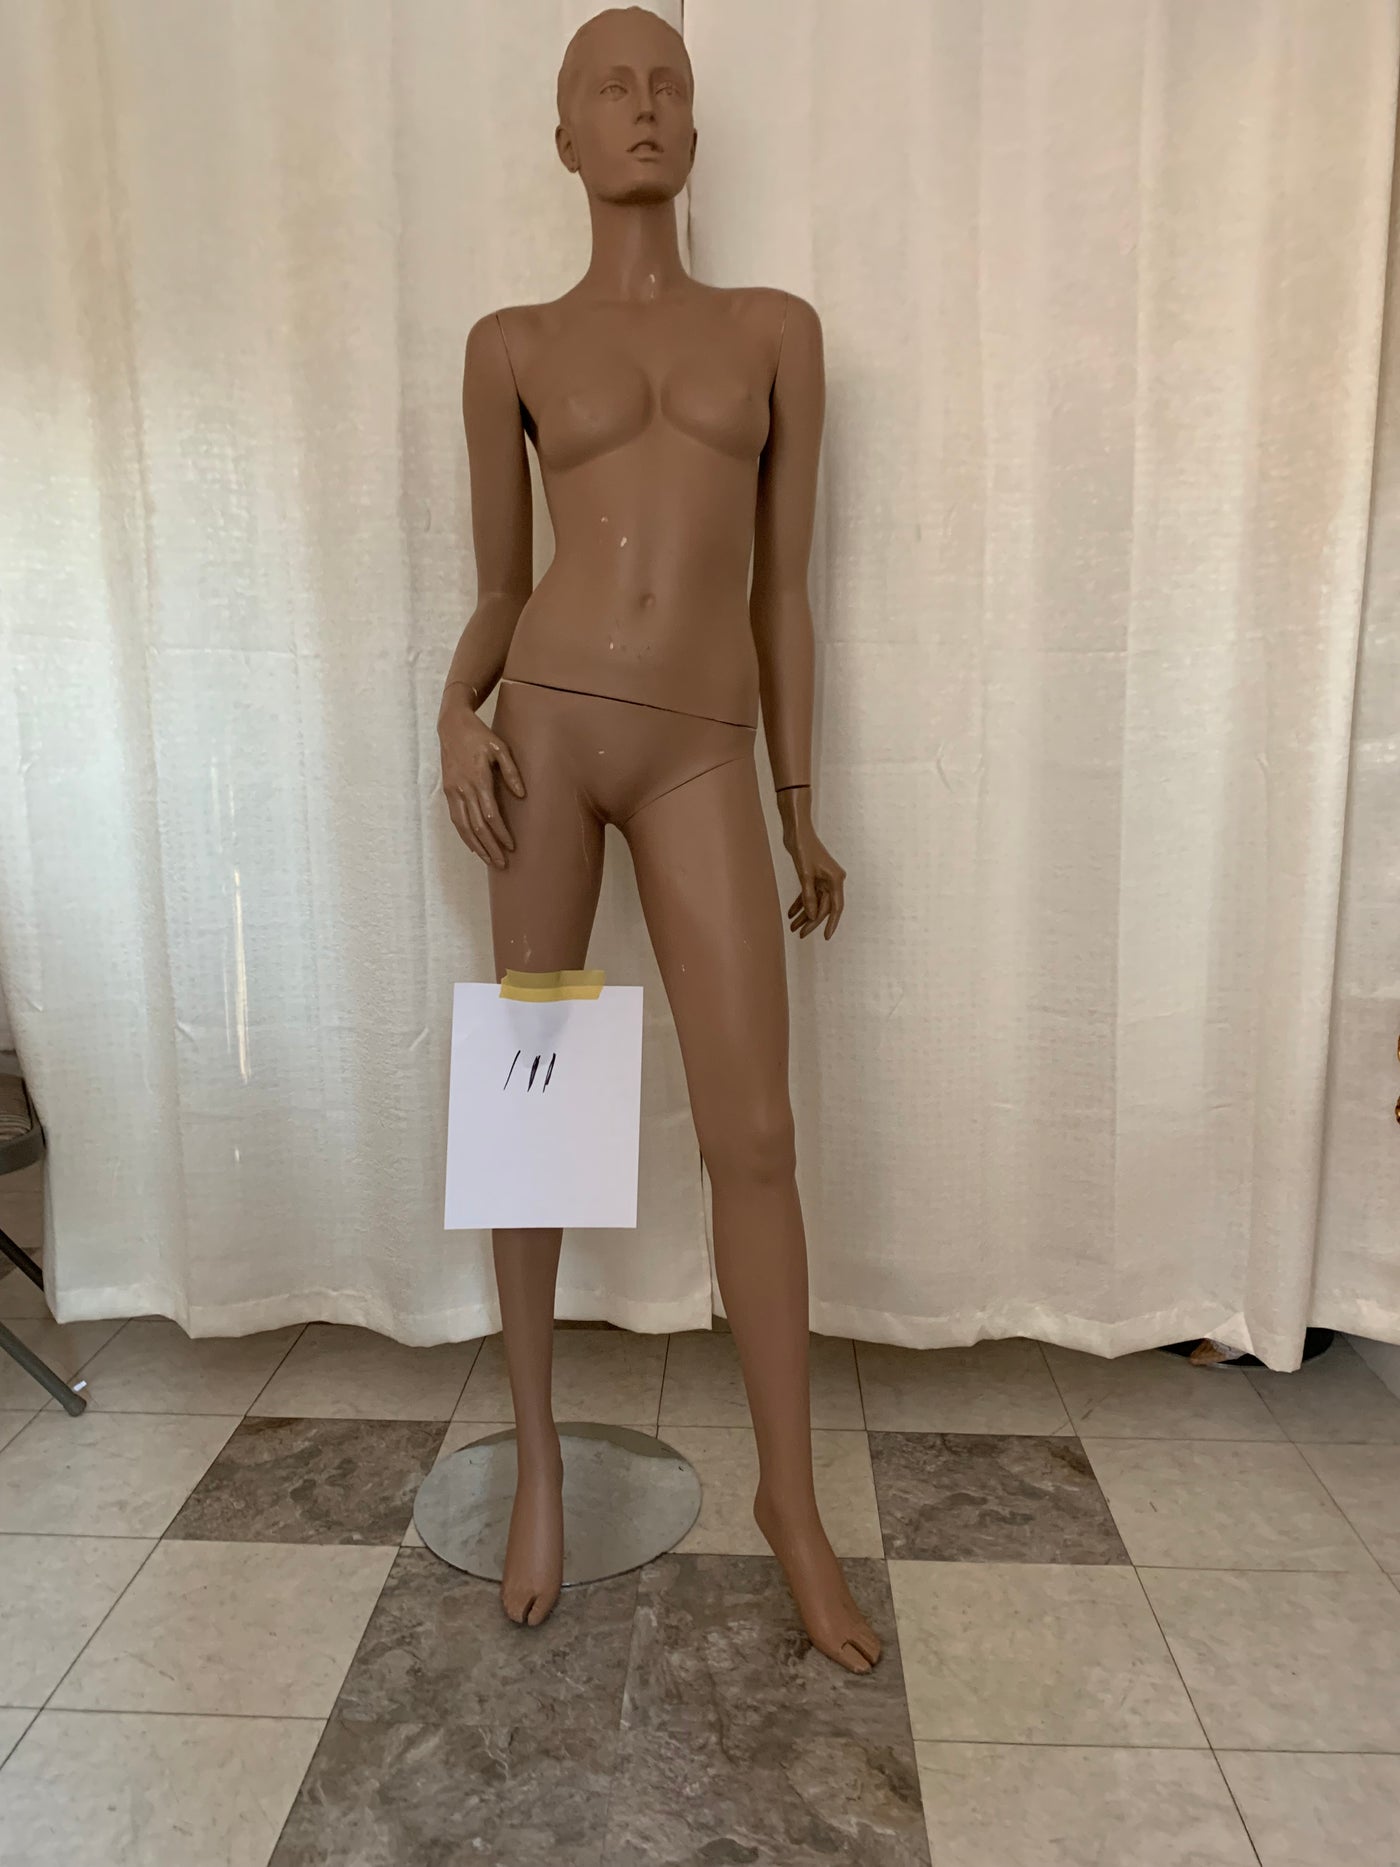 Used Female Adel Rootstein Mannequin #111 - Girl Thing